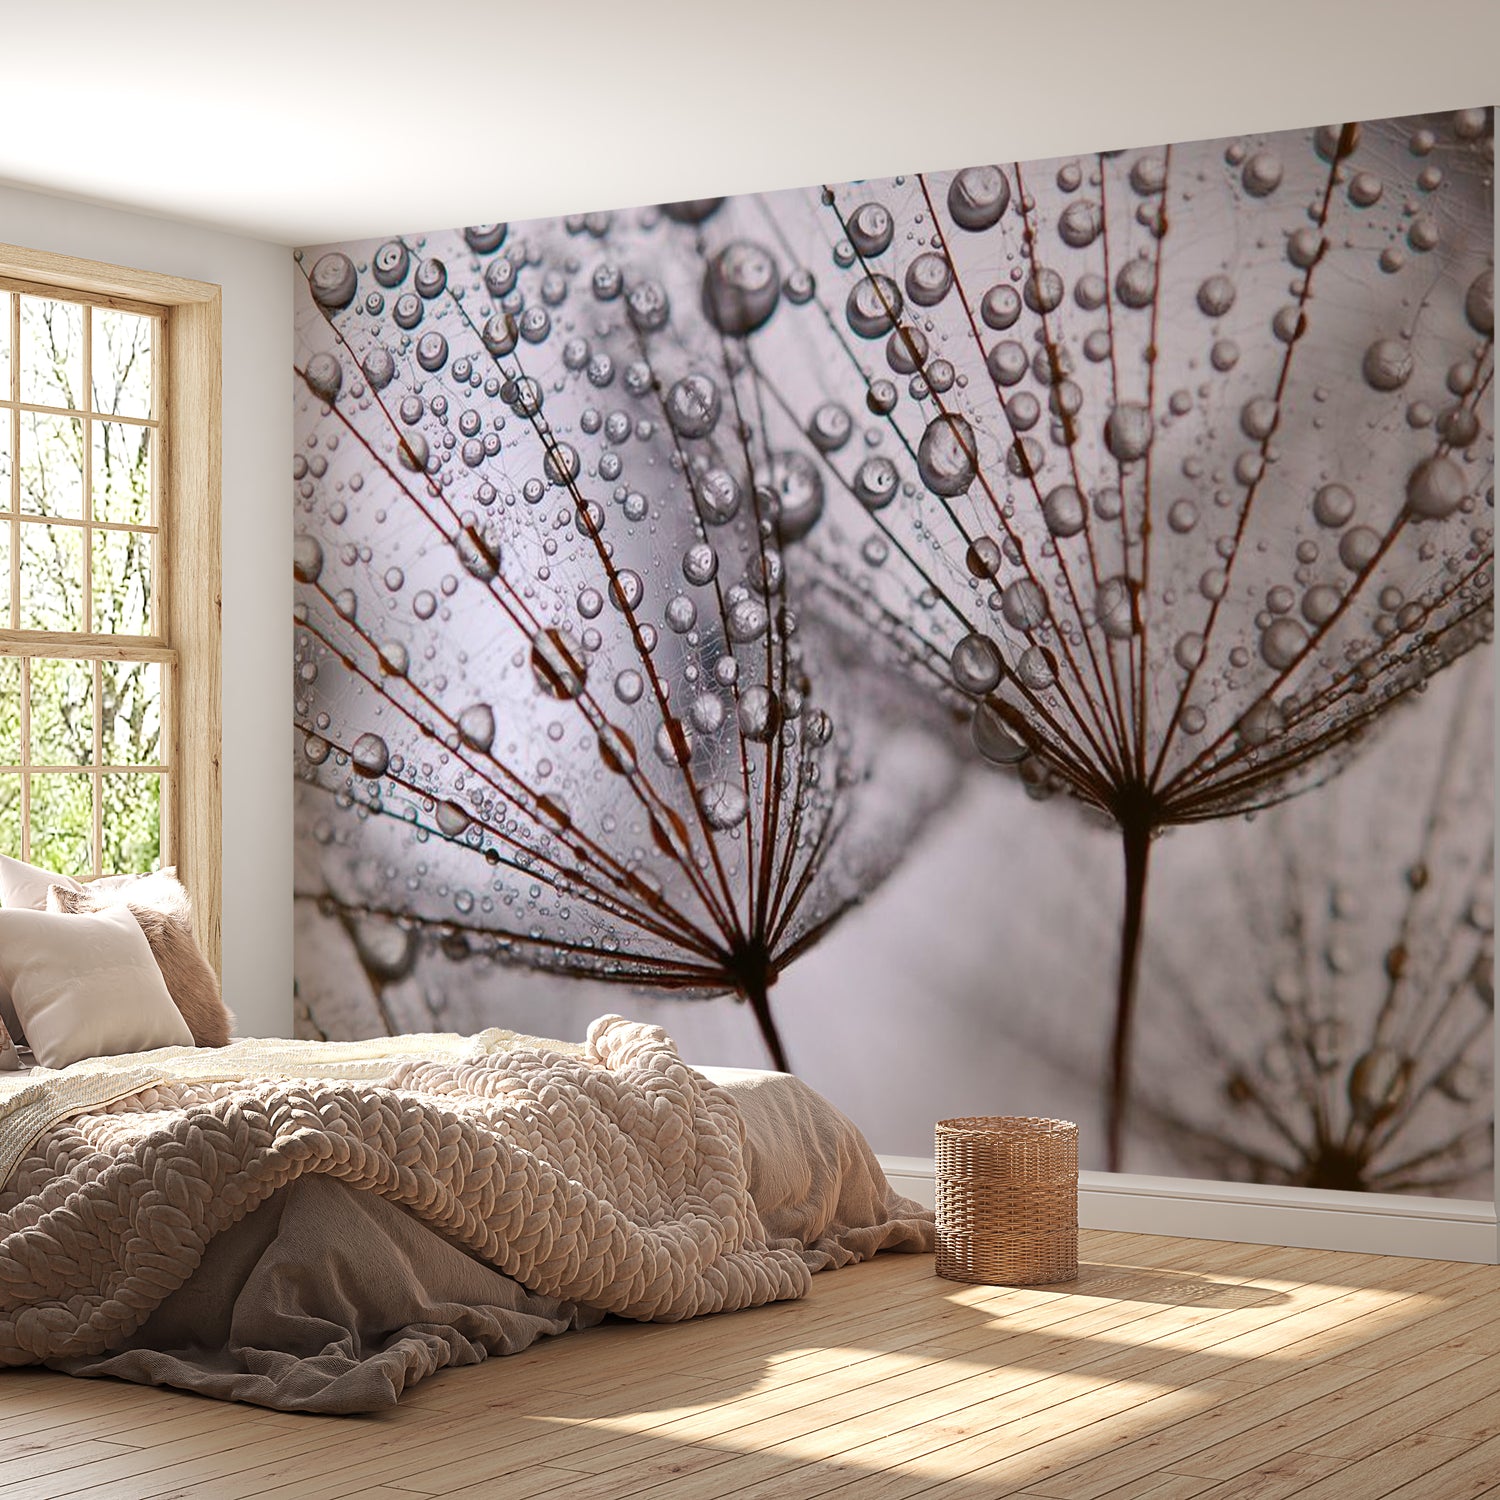 Floral Wallpaper Wall Mural - Dandelion And Morning Dew